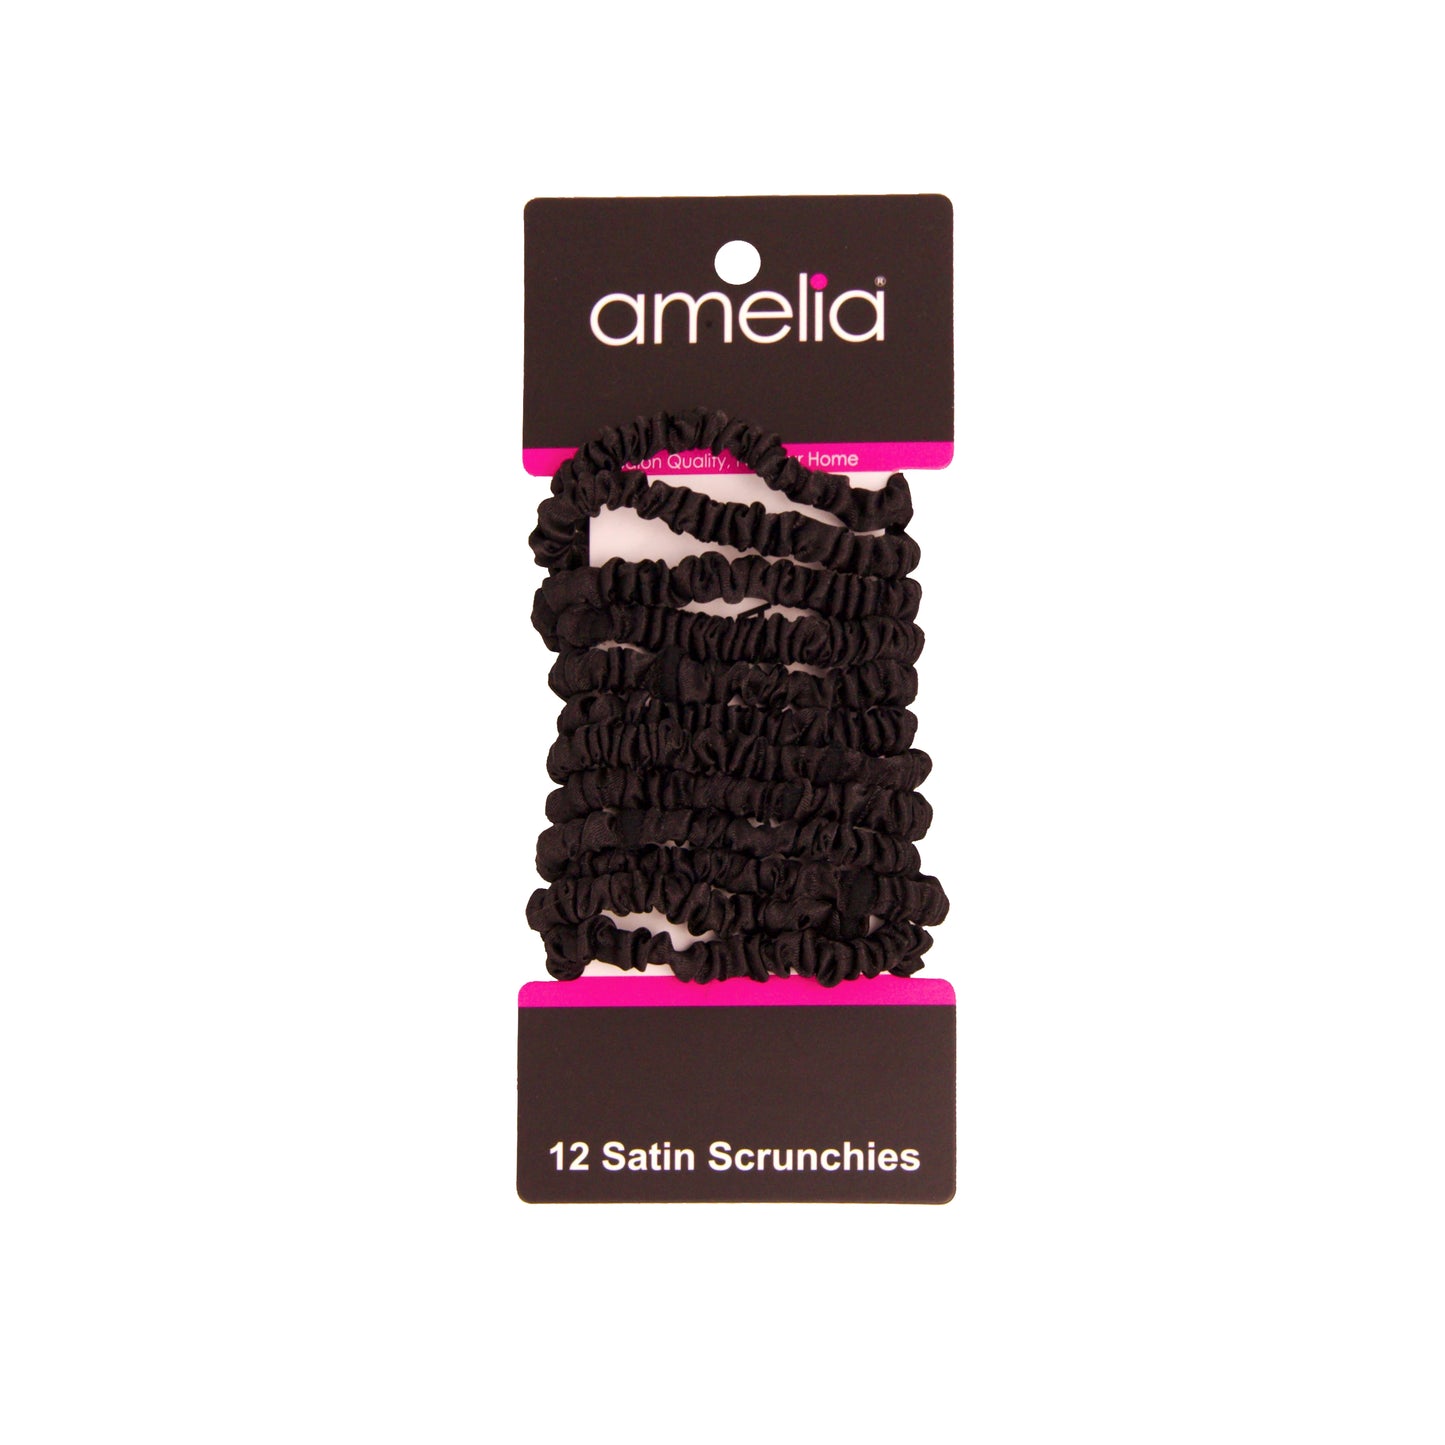 Amelia Beauty, Black Skinny Satin Scrunchies, 2in Diameter, Gentle and Strong Hold, No Snag, No Dents or Creases. 12 Pack